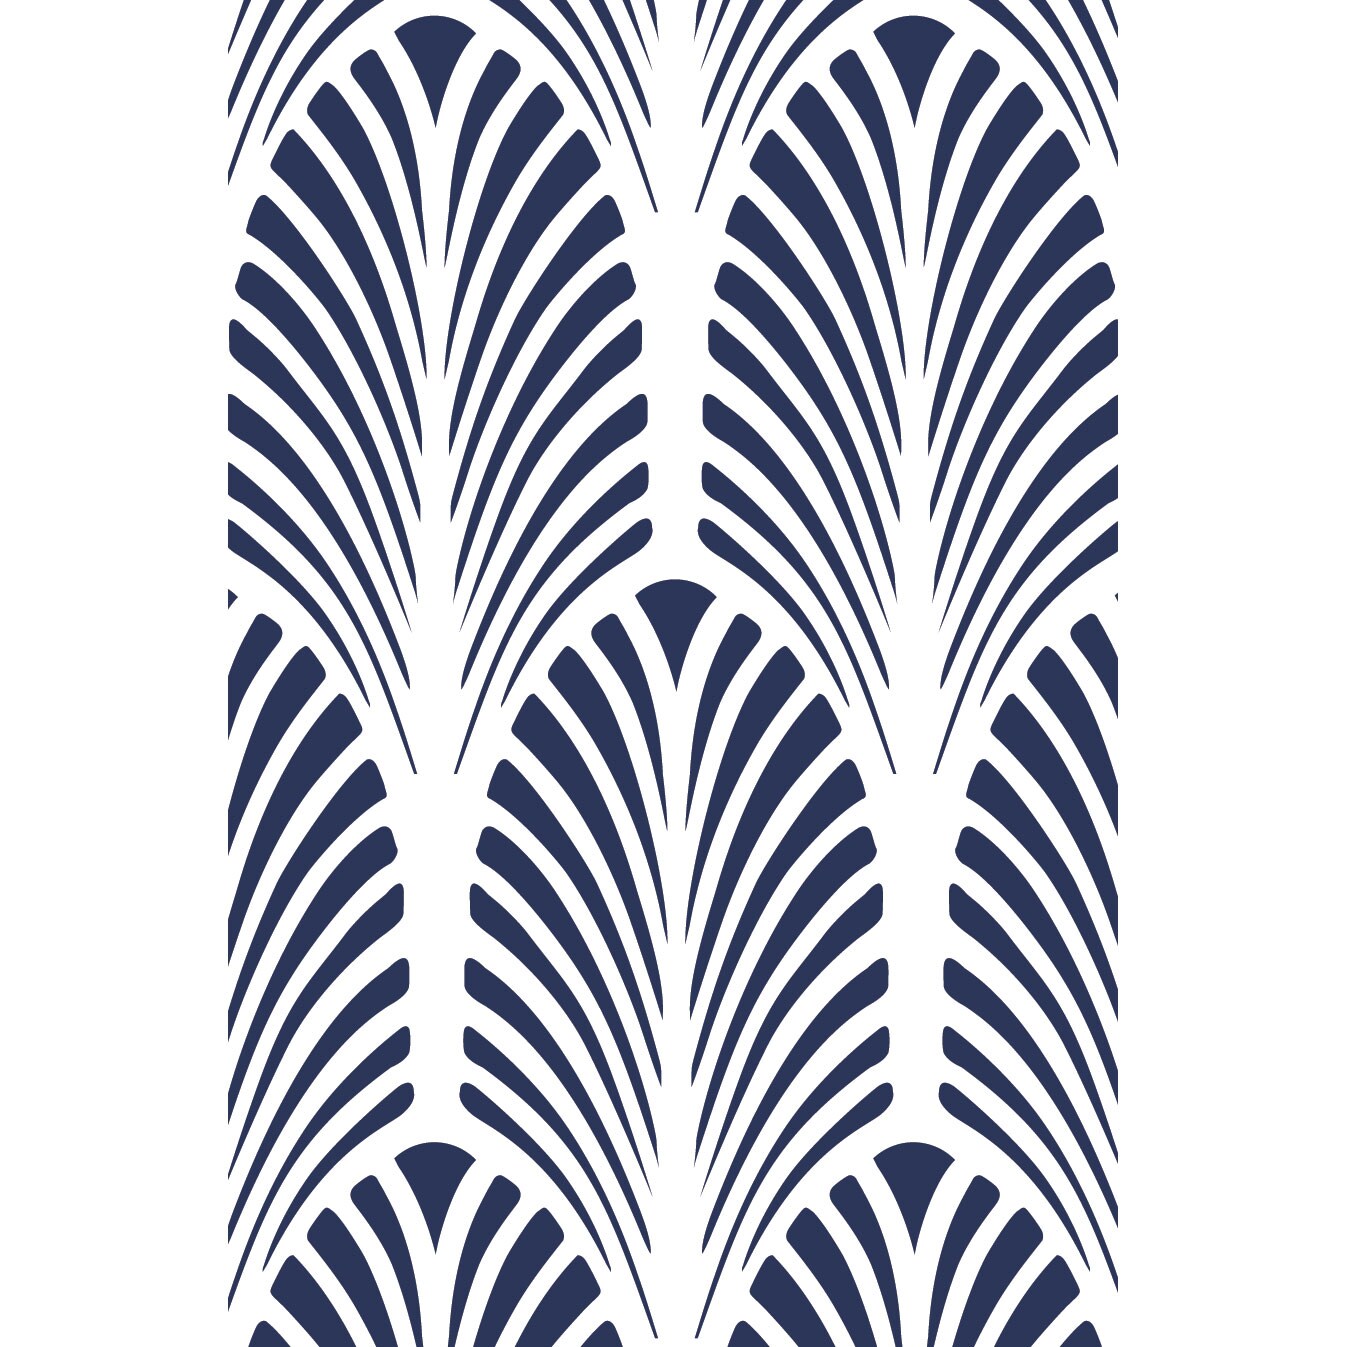 Great Gatsby Art Deco Fan Wall Stencil | 3711 by Designer Stencils | Pattern Stencils | Reusable Stencils for Painting | Safe &#x26; Reusable Template for Wall Decor | Try This Stencil Instead of a Wallpaper | Easy to Use &#x26; Clean Art Stencil Pattern